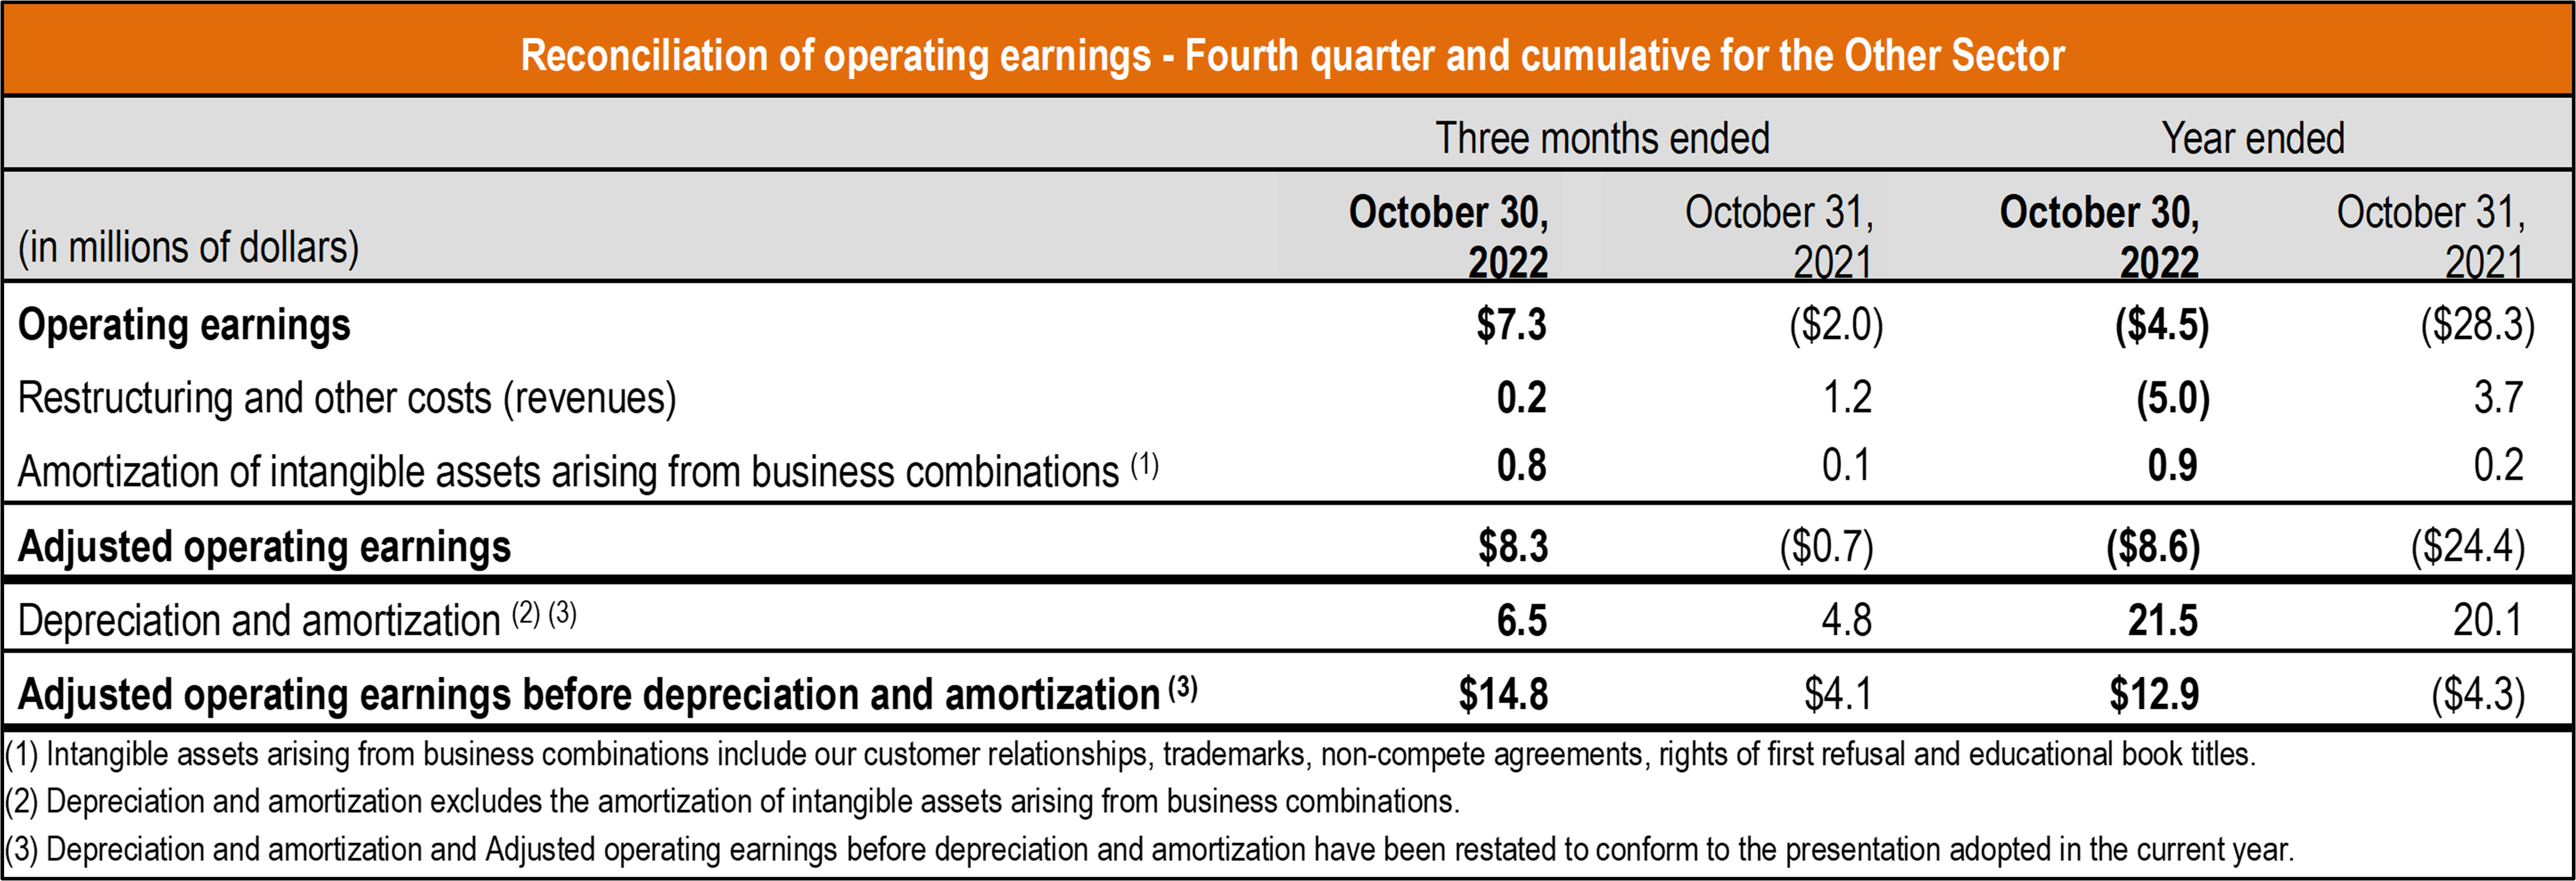 table reconciliation operating earnings Q4 and fiscal year 2022 other sectors TCL